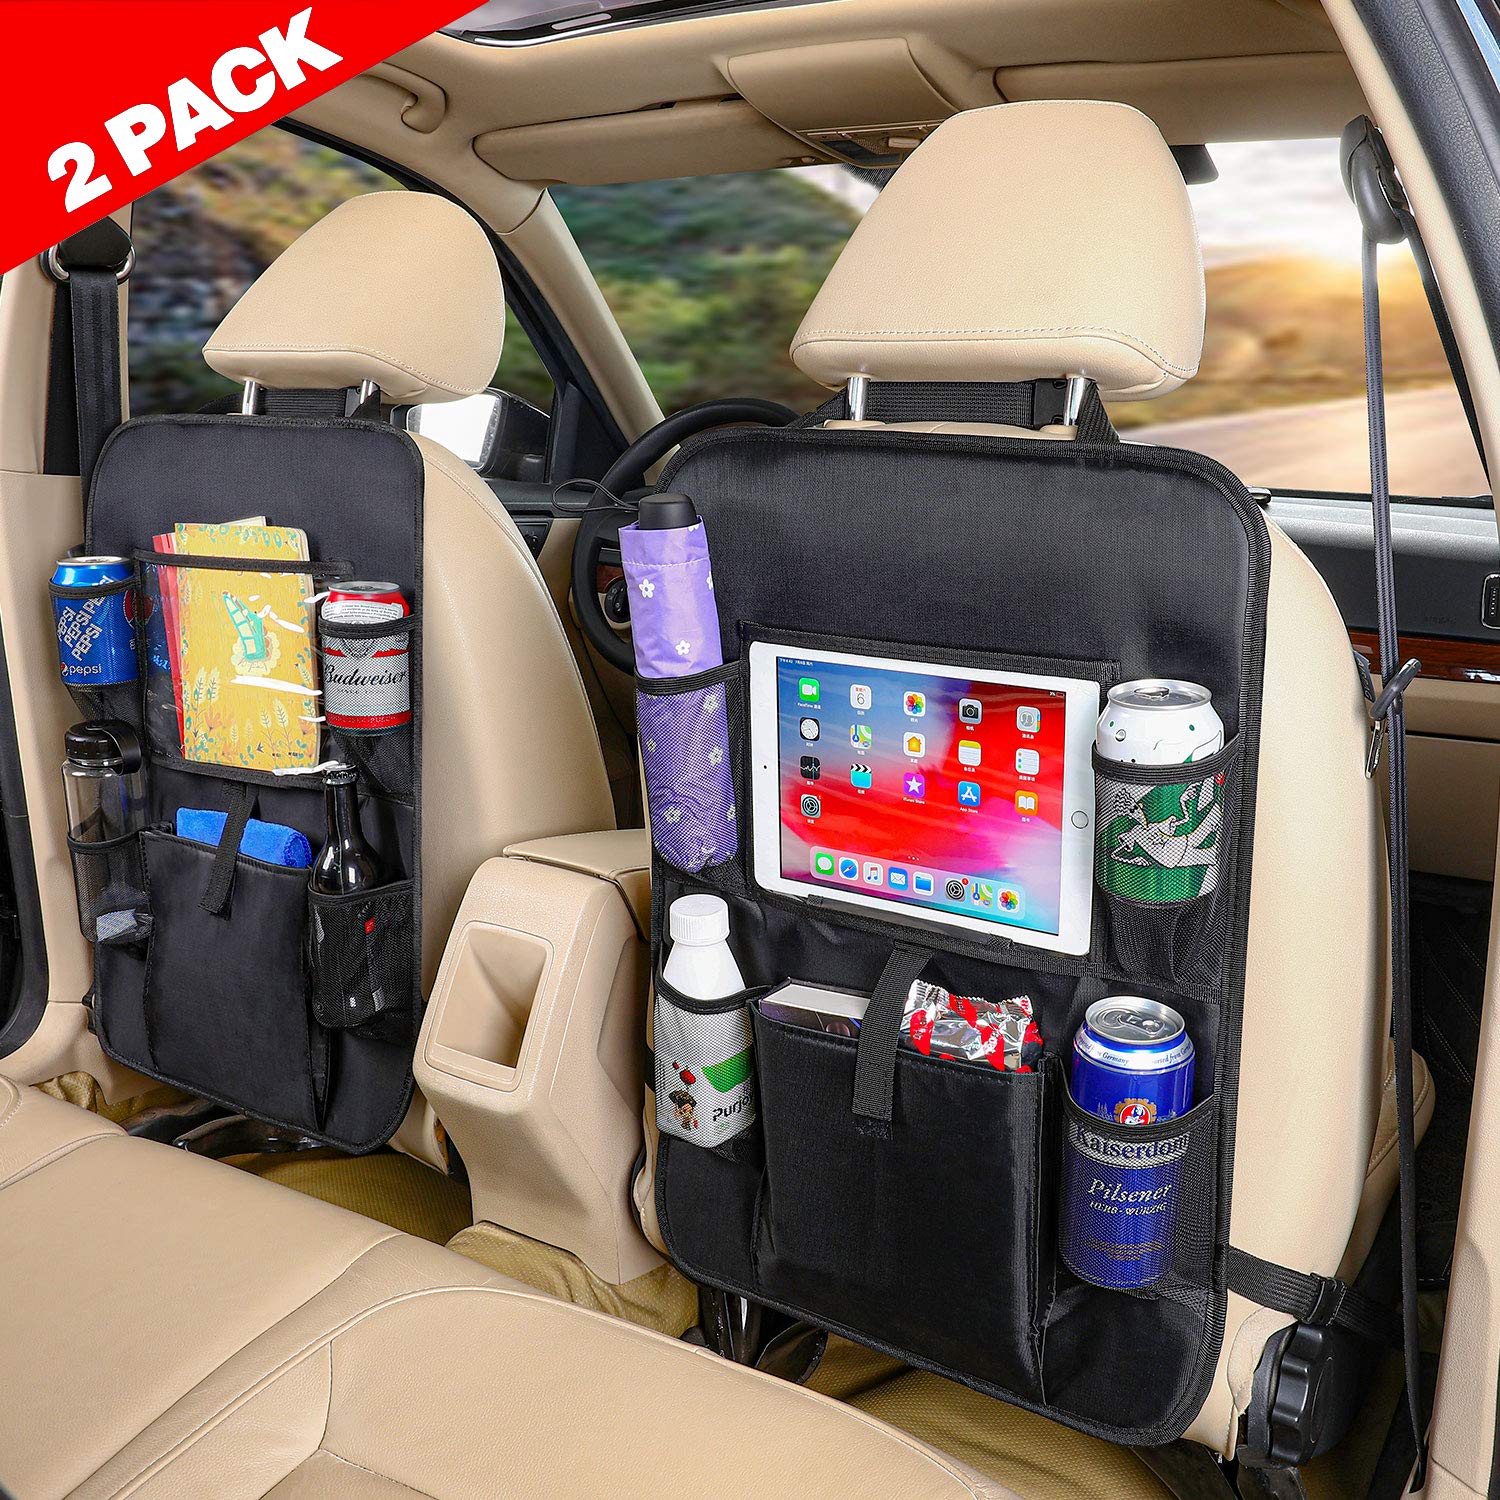 Backseat Organizer Car Backseat Organizer with Touch Screen Tablet Holder Storage Pockets Kick Mats Car Seat Back Protectors Great Travel Accessories for Kids and Toddlers 2 Pack 